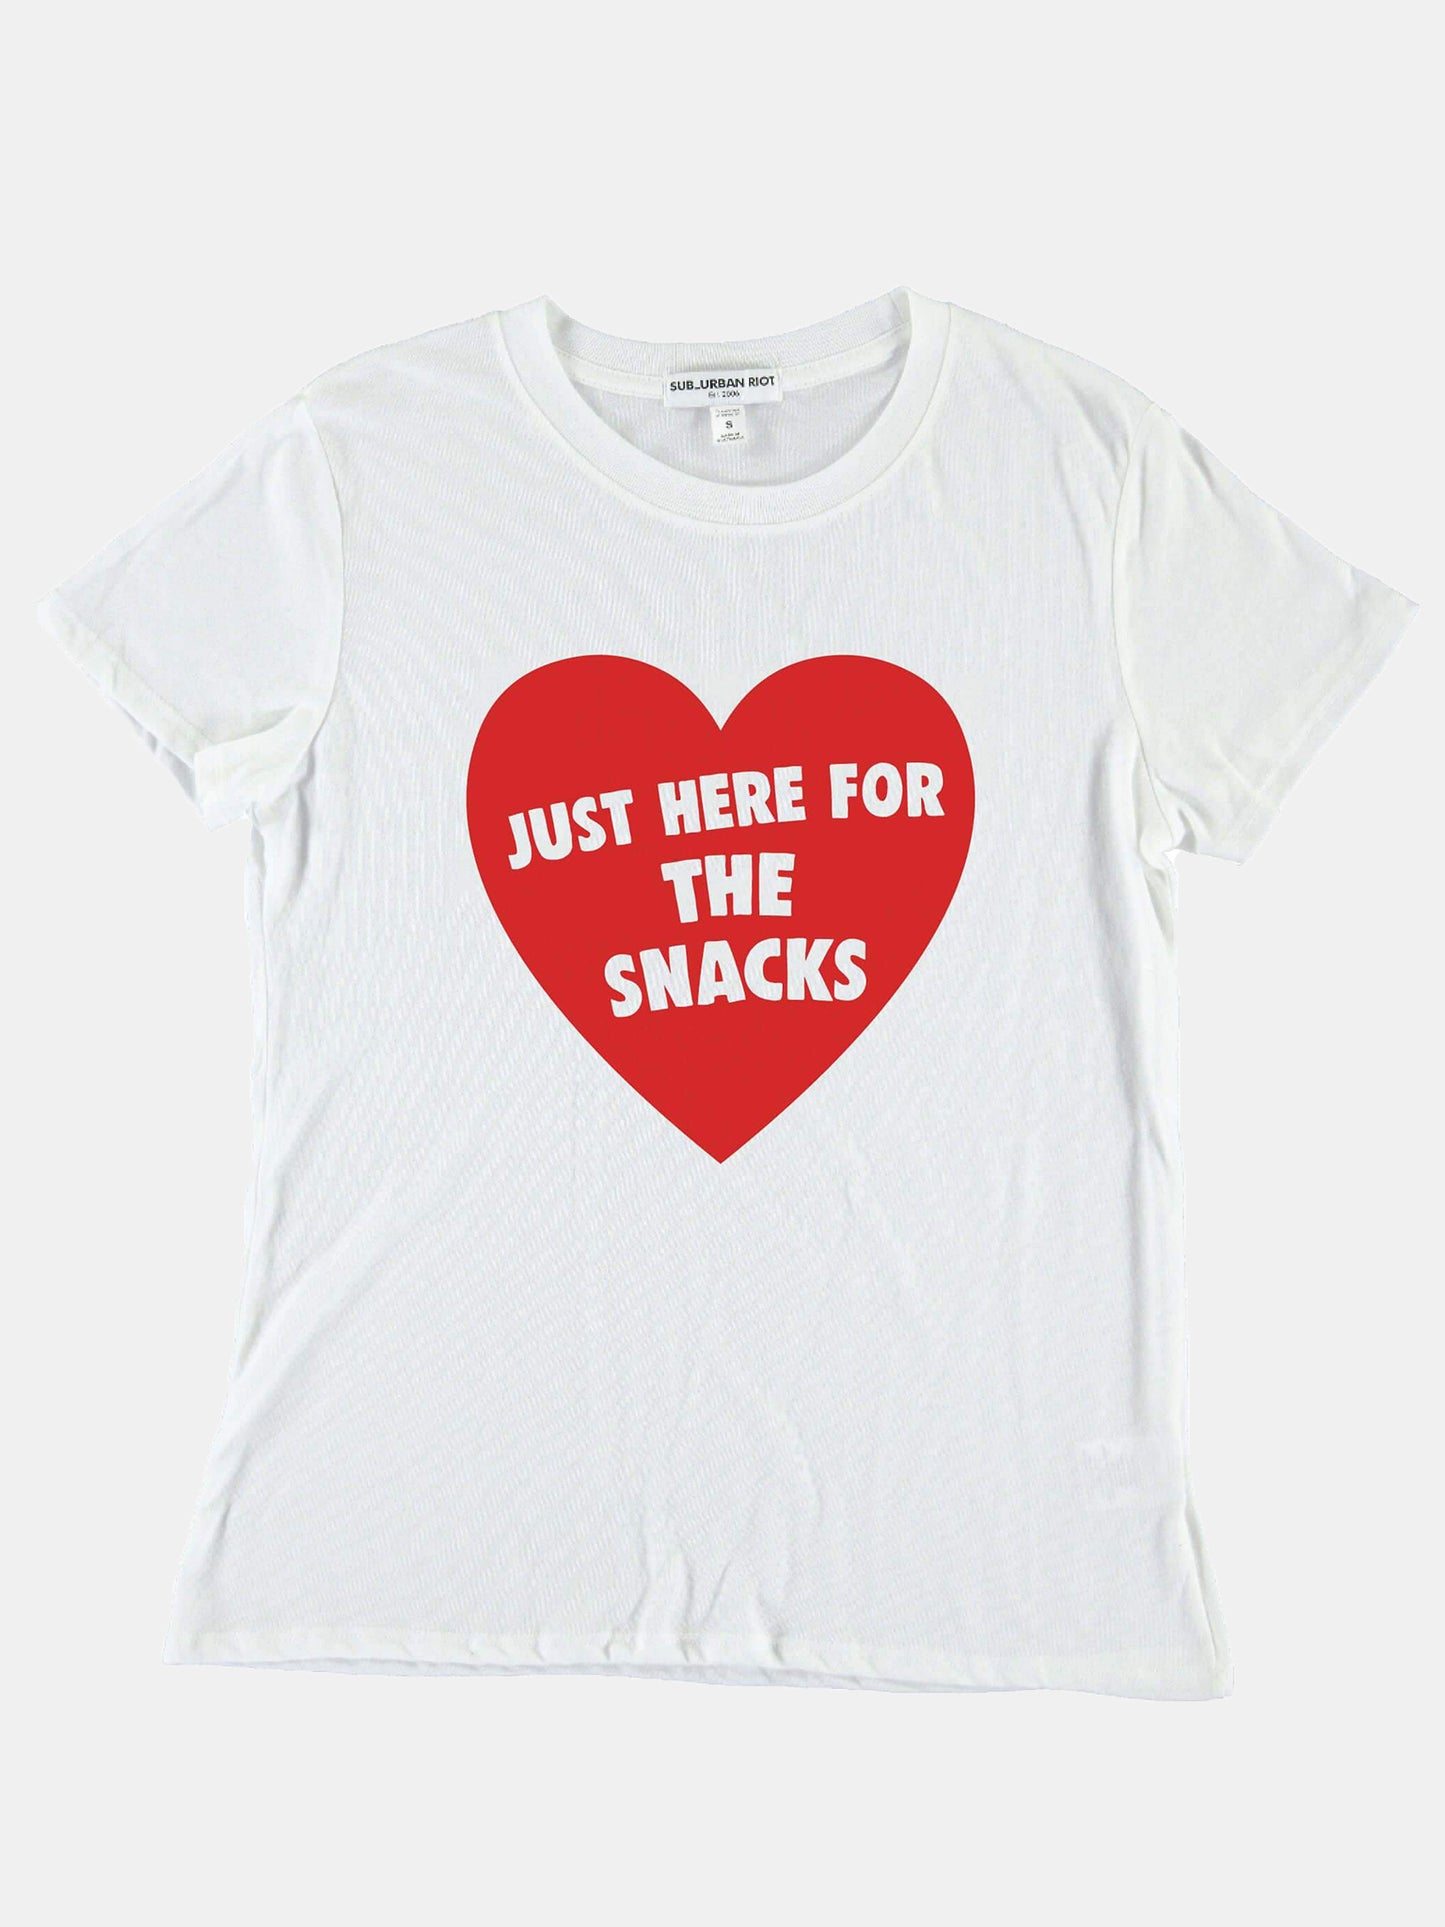 Sub_Urban Riot Girls' Here For The Snacks Loose Tee